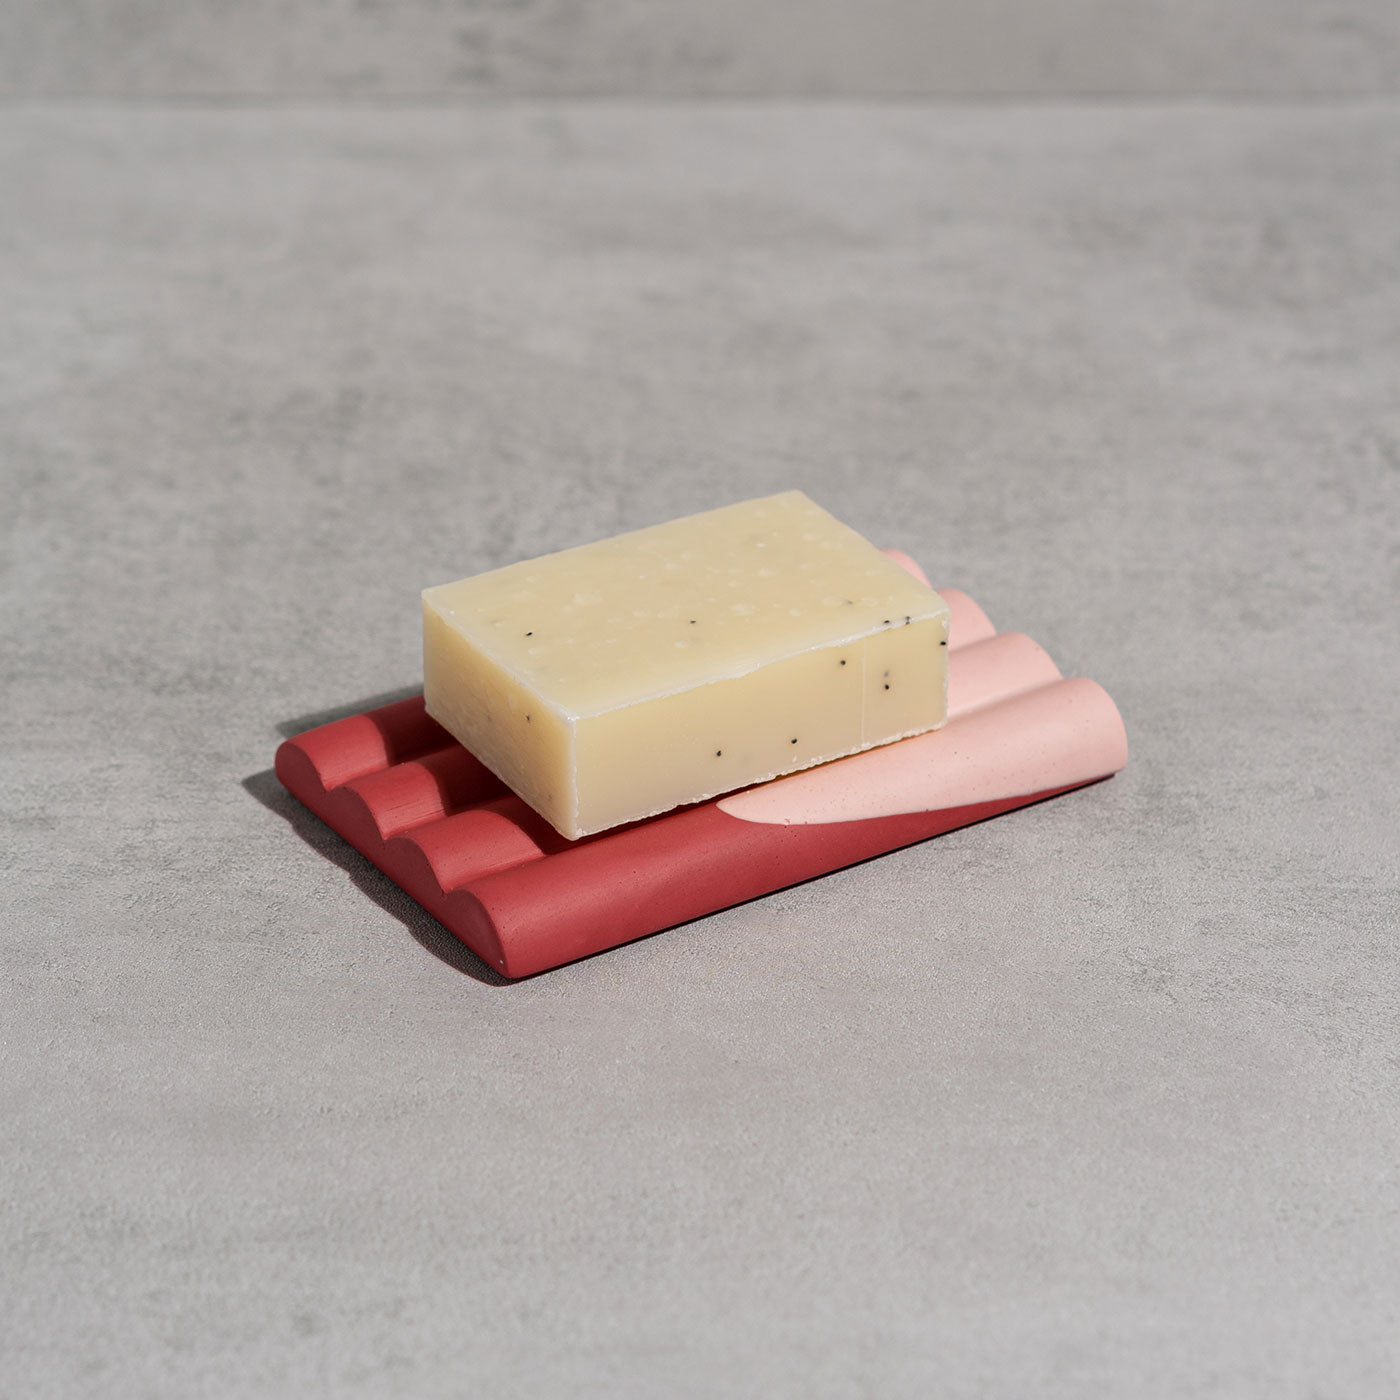 Jesmonite Soap Dish in Pale Pink & Berry by Yod and Co